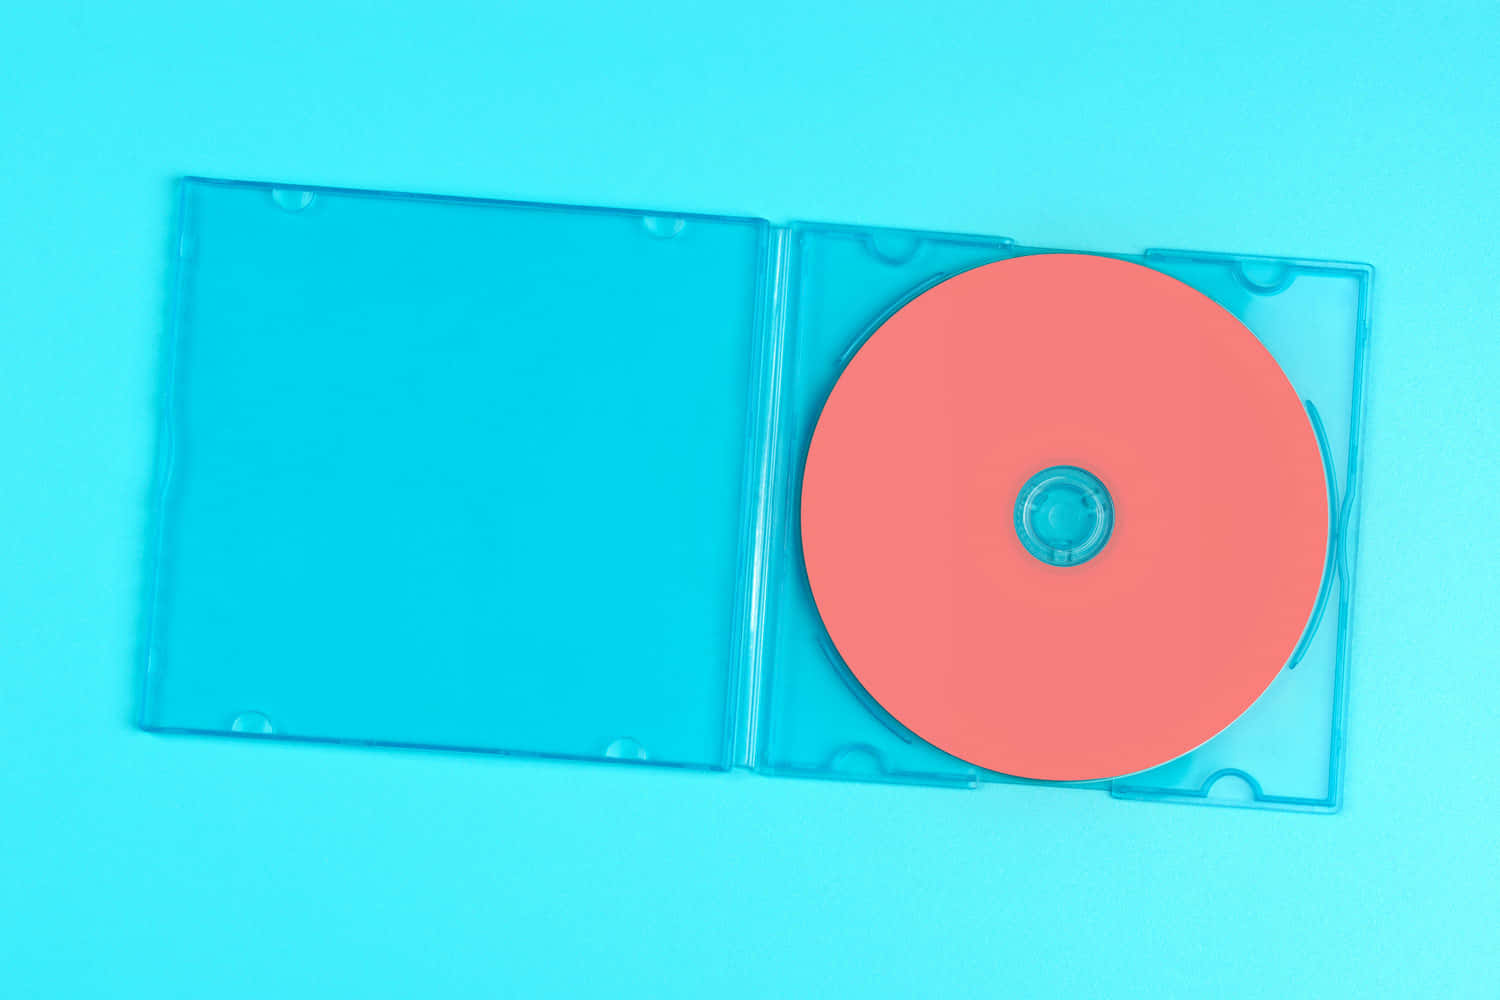 A Blue Cd Case With A Red Disc Inside